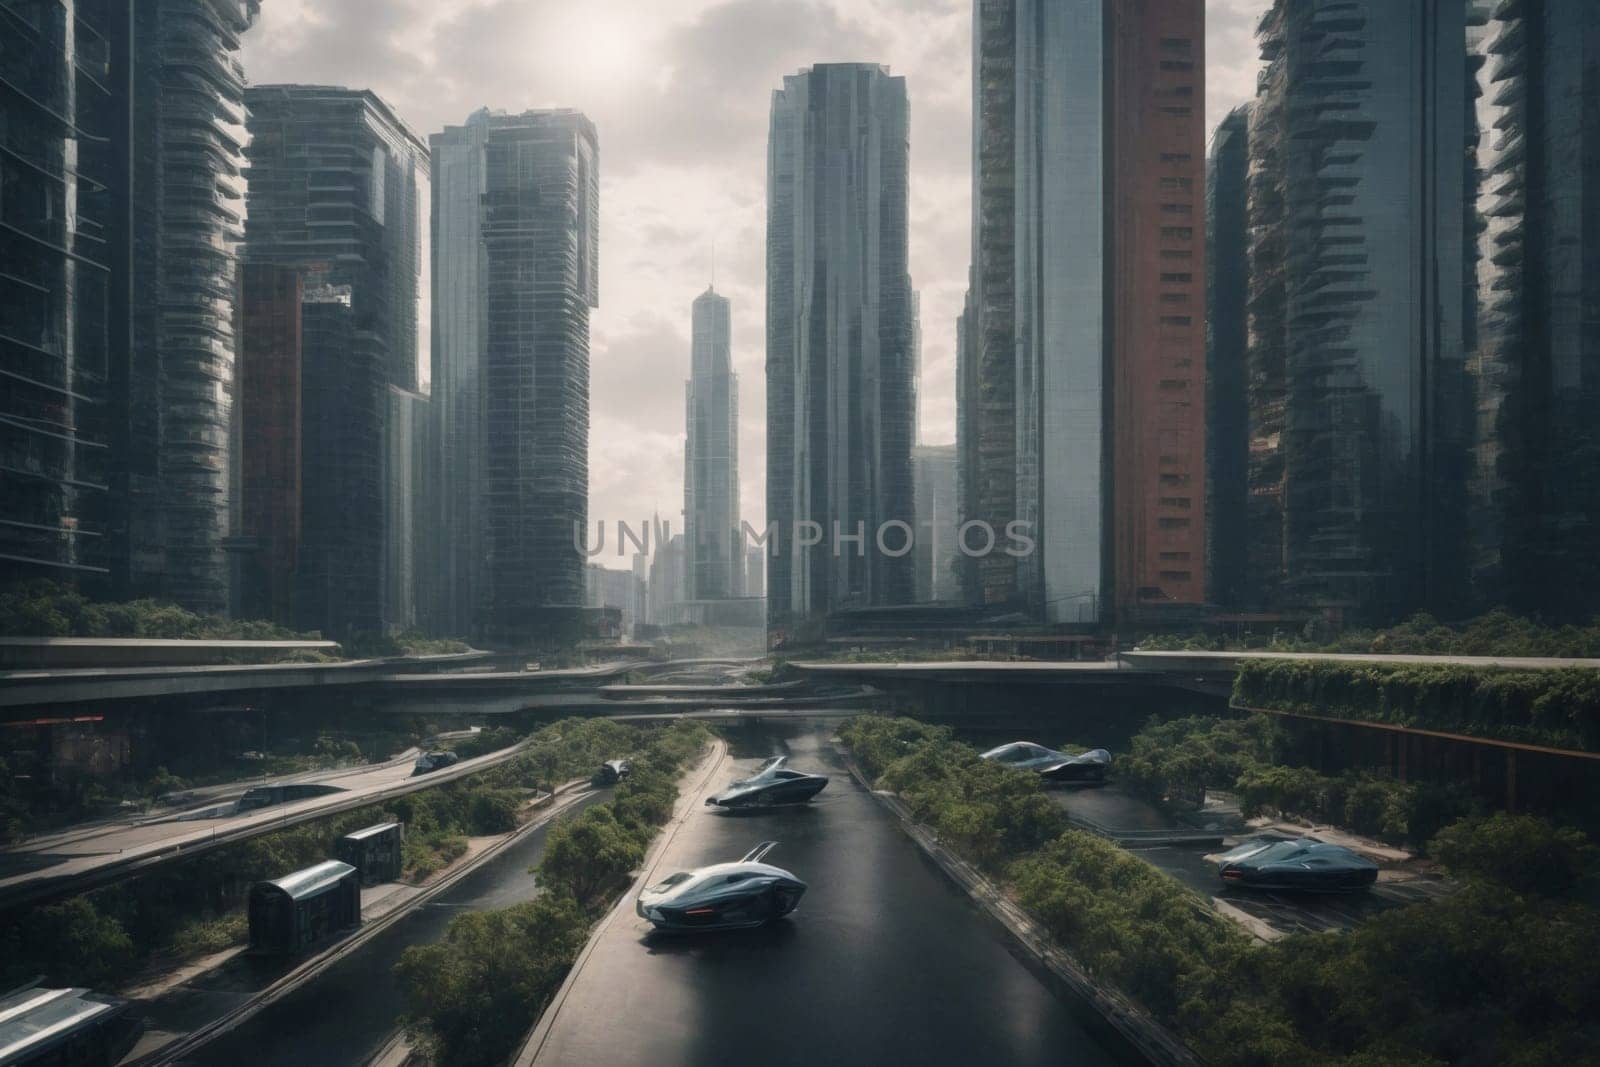 A bustling city scene with towering buildings and cars crowding the streets.